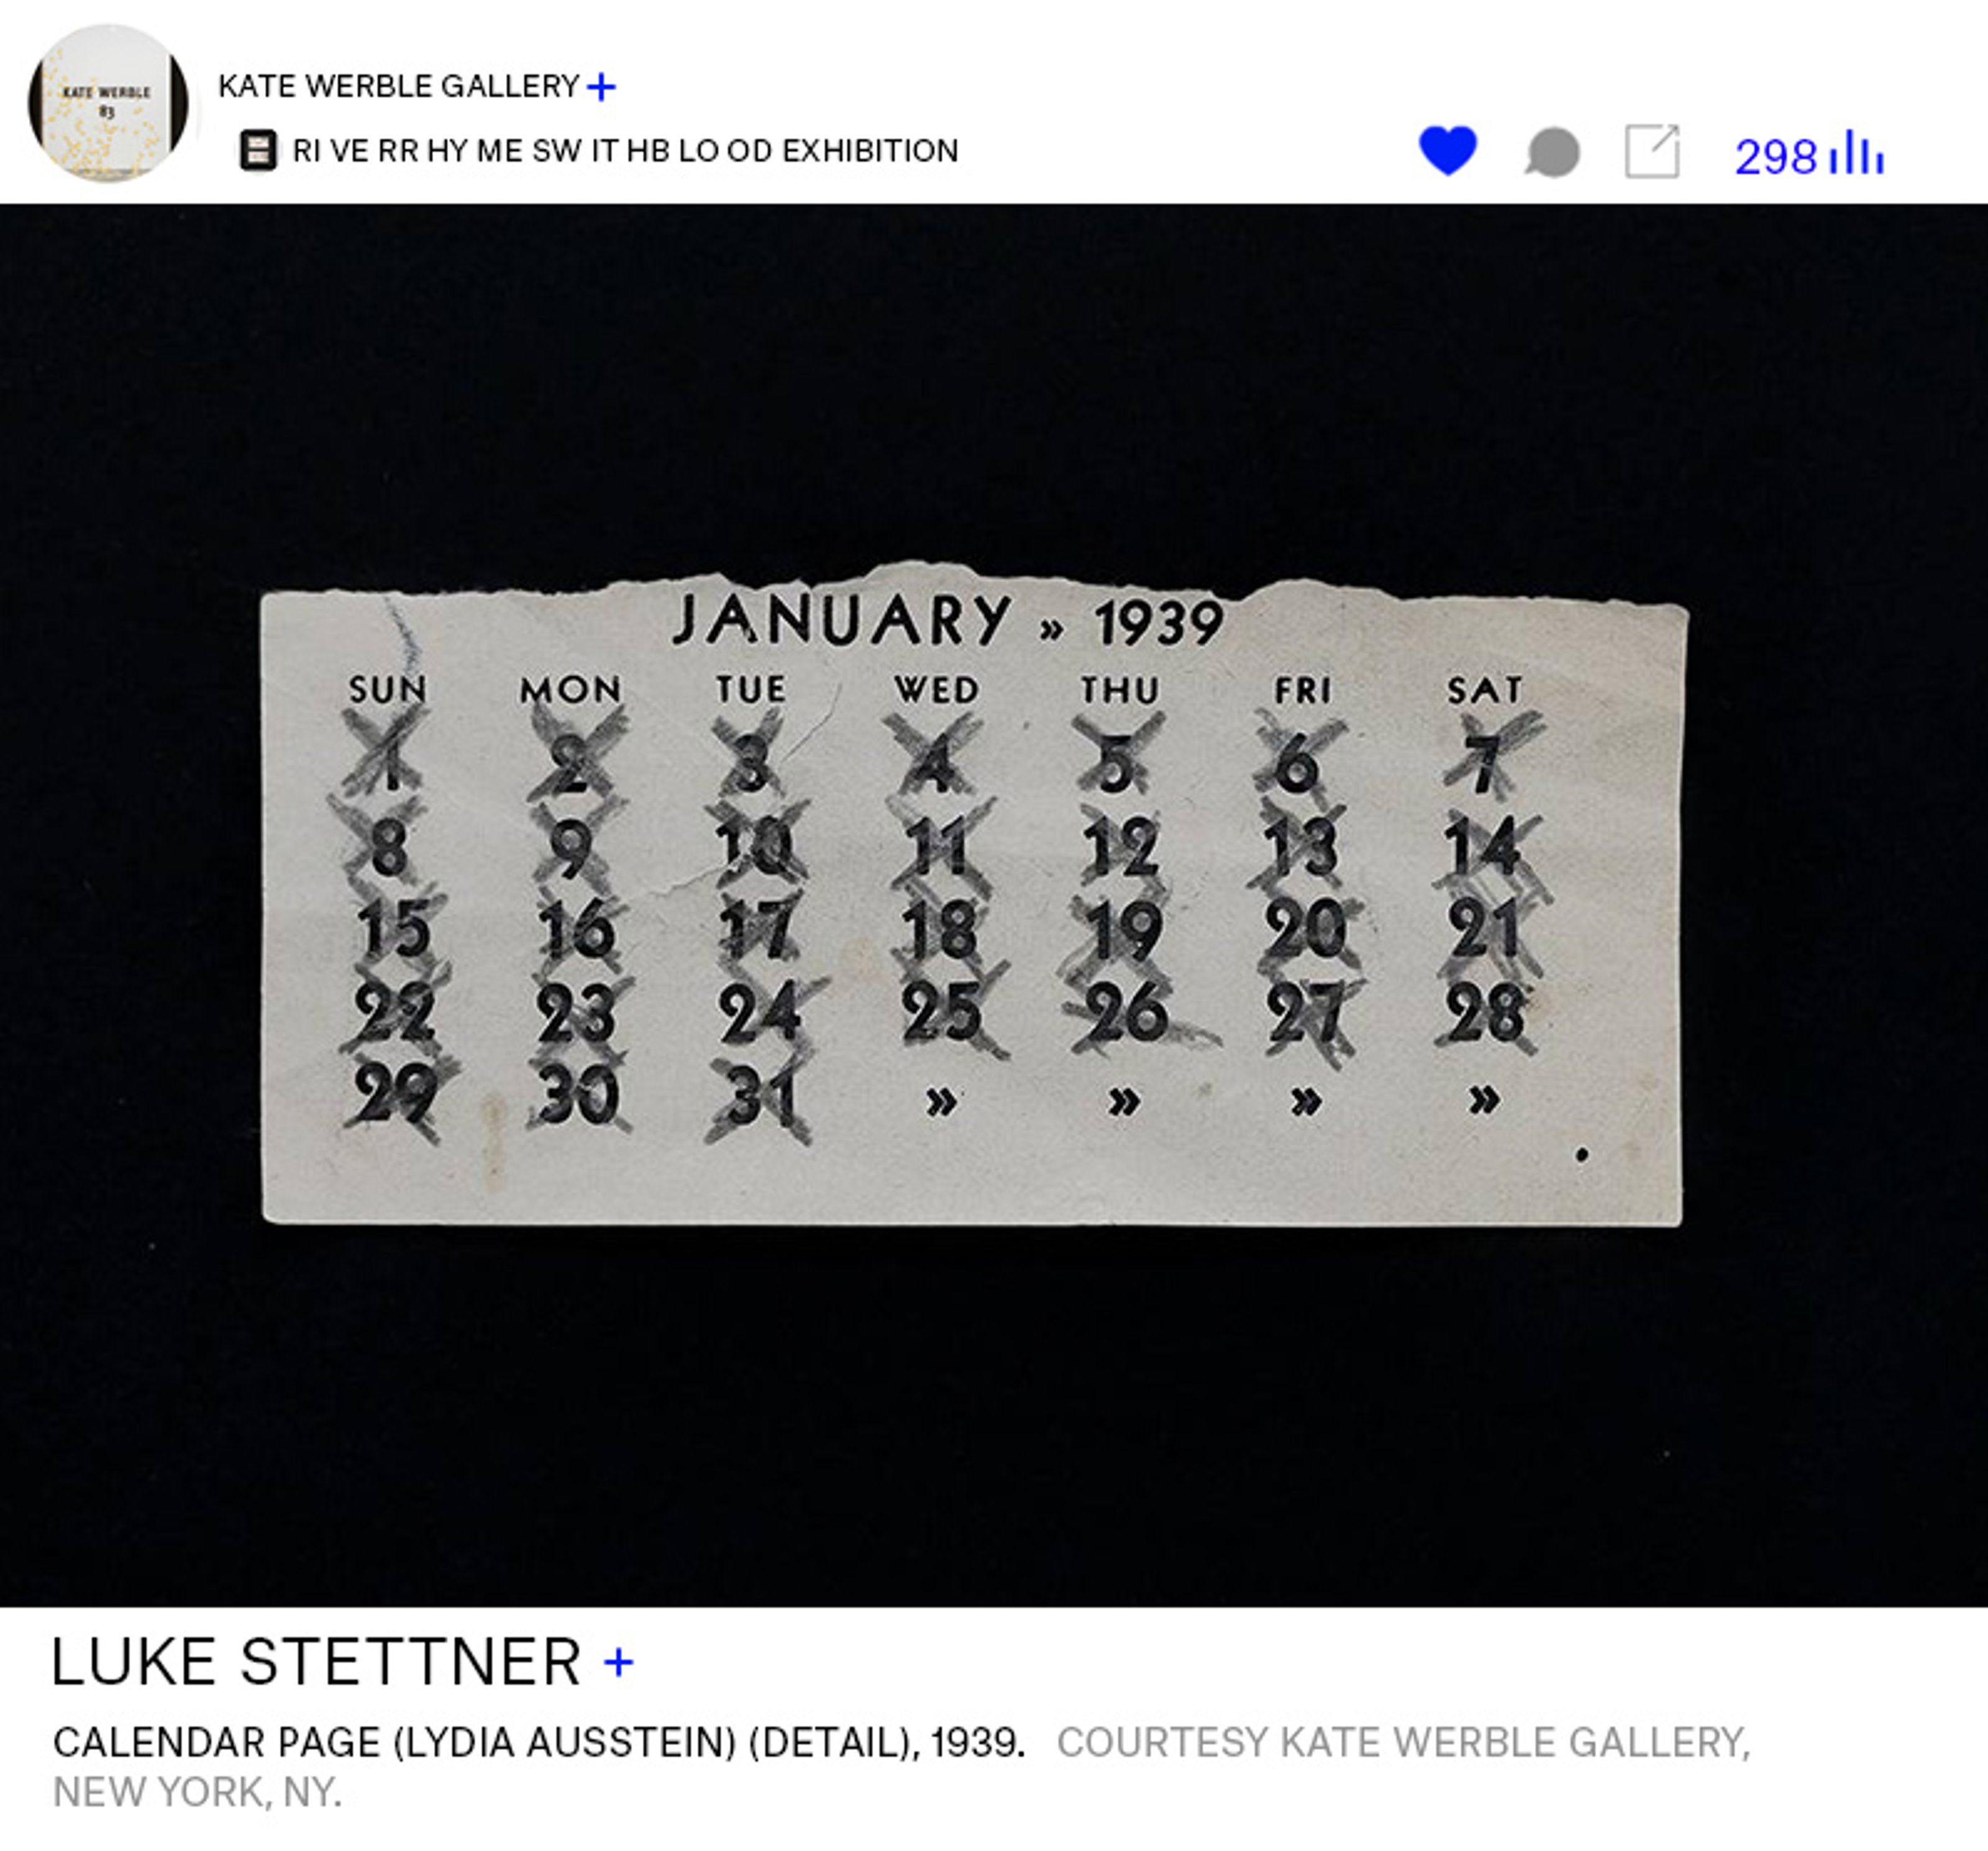 Luke Stettner's artwork, Calendar Page (Lydia Ausstein), 1939, from Kate Werble Gallery's exhibition RI VE RR HY ME SW IT HB LO OD, on Collecteurs